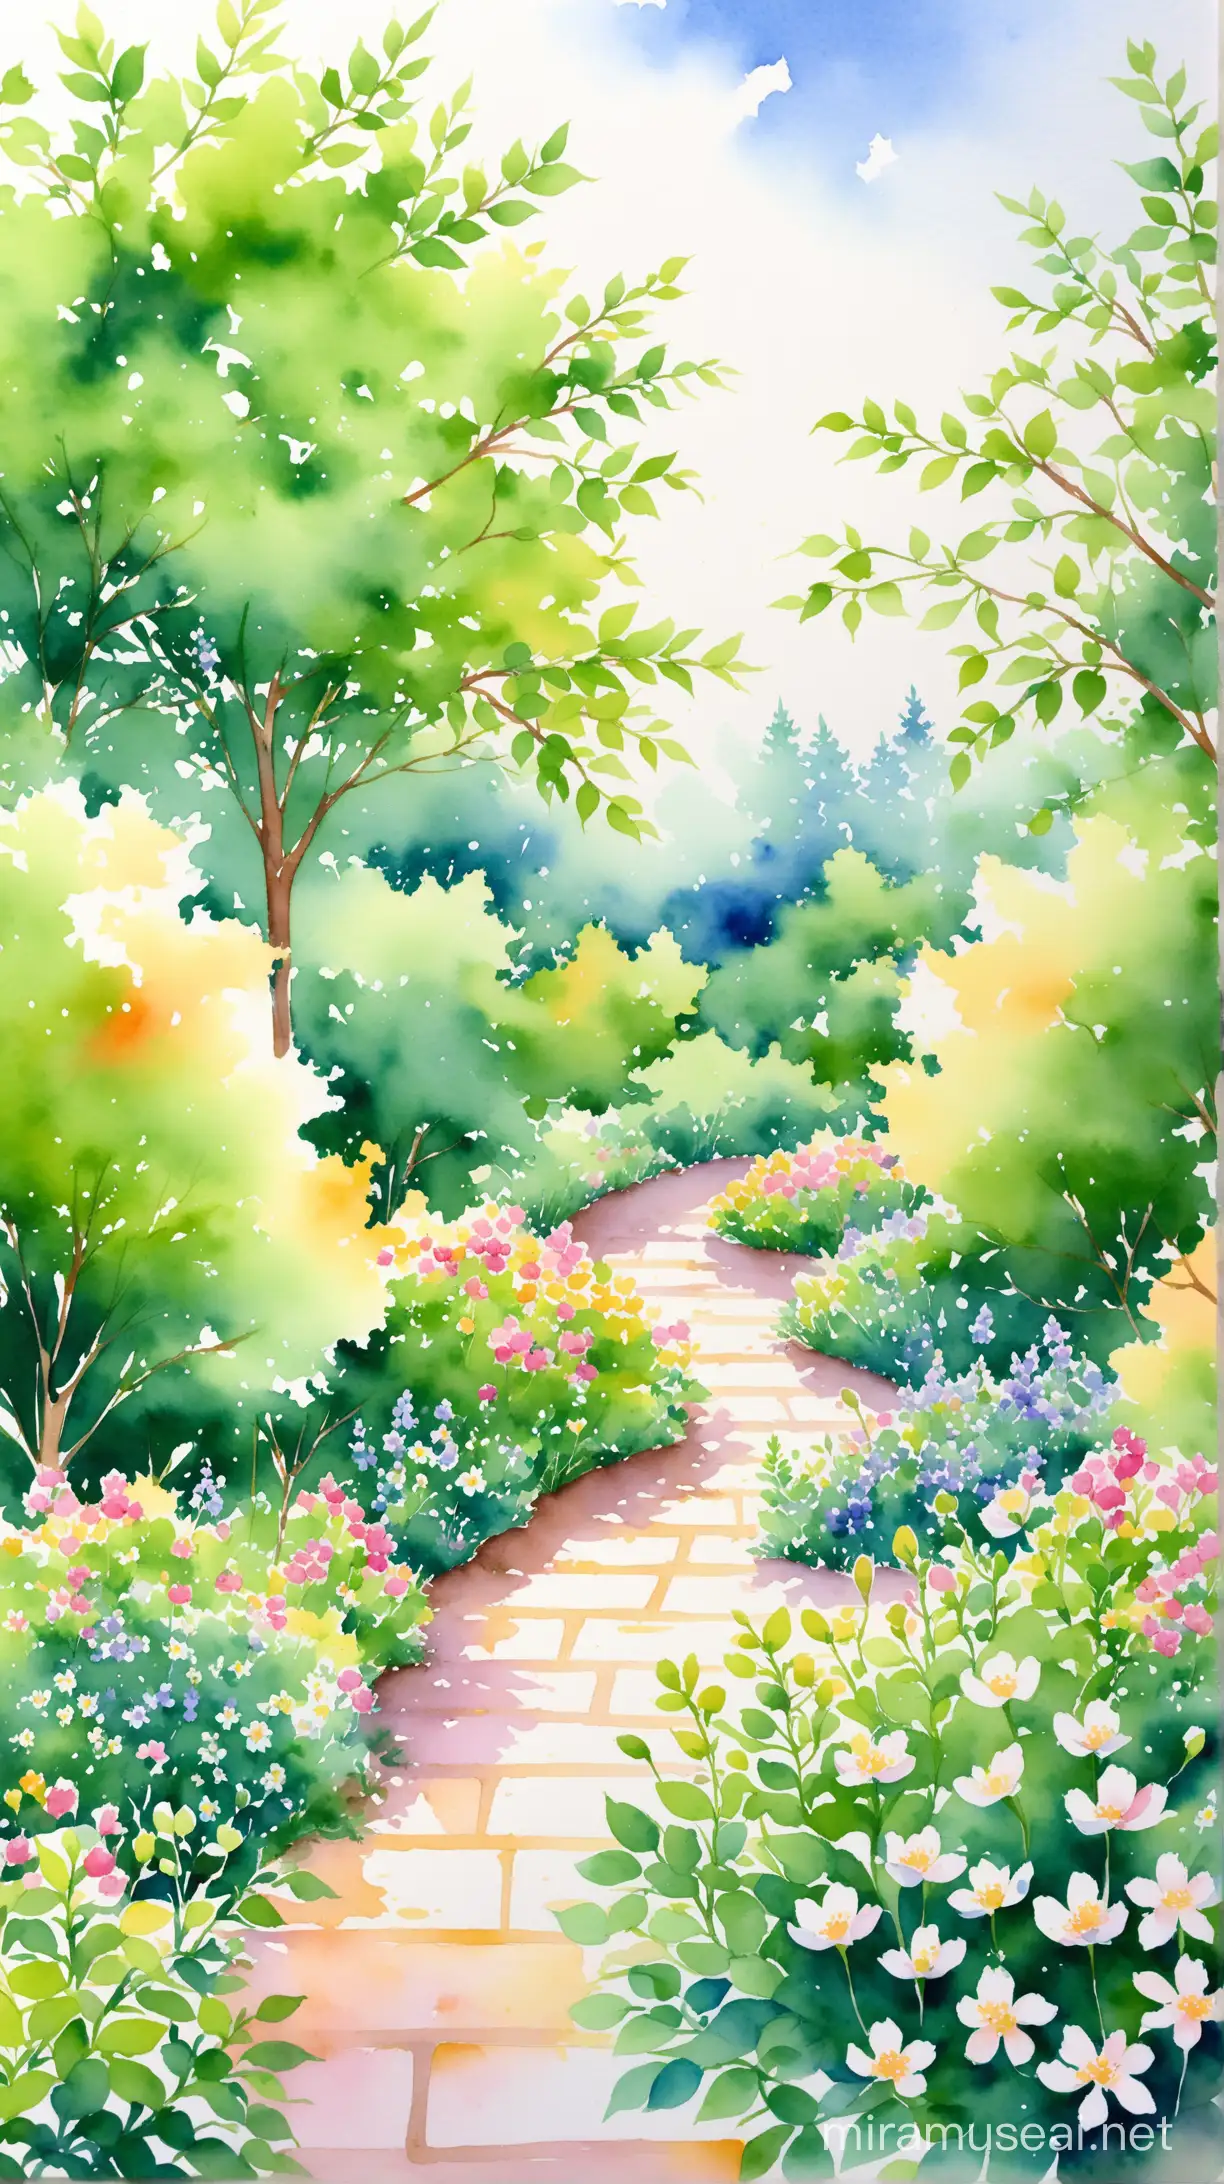 Serene Watercolor Garden with Green Leaves and Small Flowers